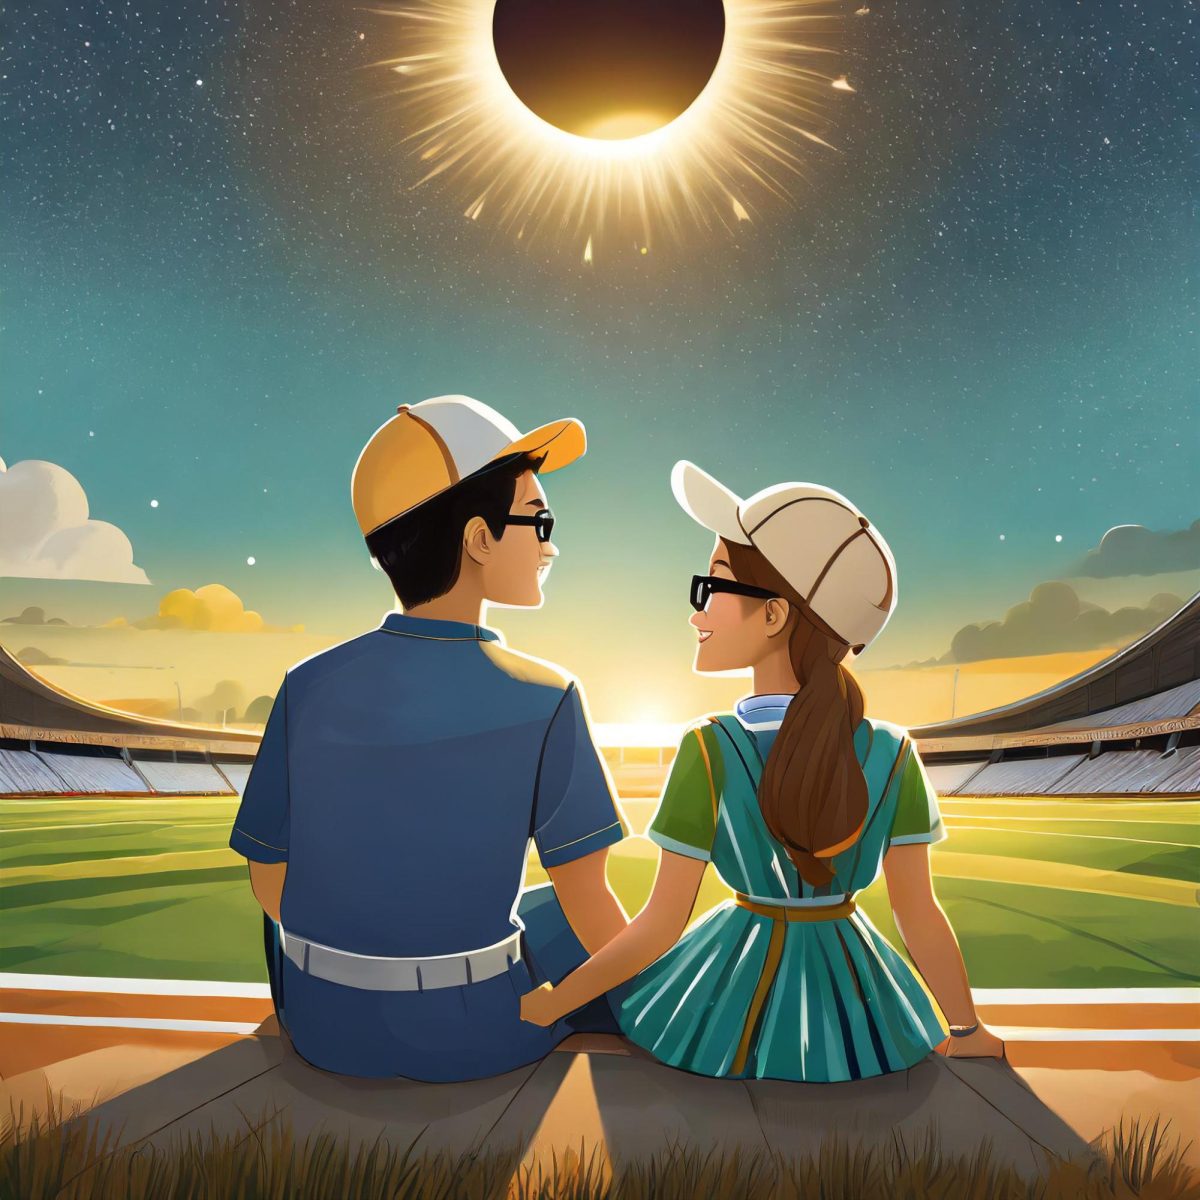 Friends+sit+together+to+watch+the+Solar+Eclipse+to+make+the+memories+that+last+a+lifetime.+%0A%28Image+created+by+Firefly+Adobe+by+Kelsey+Sweet%29